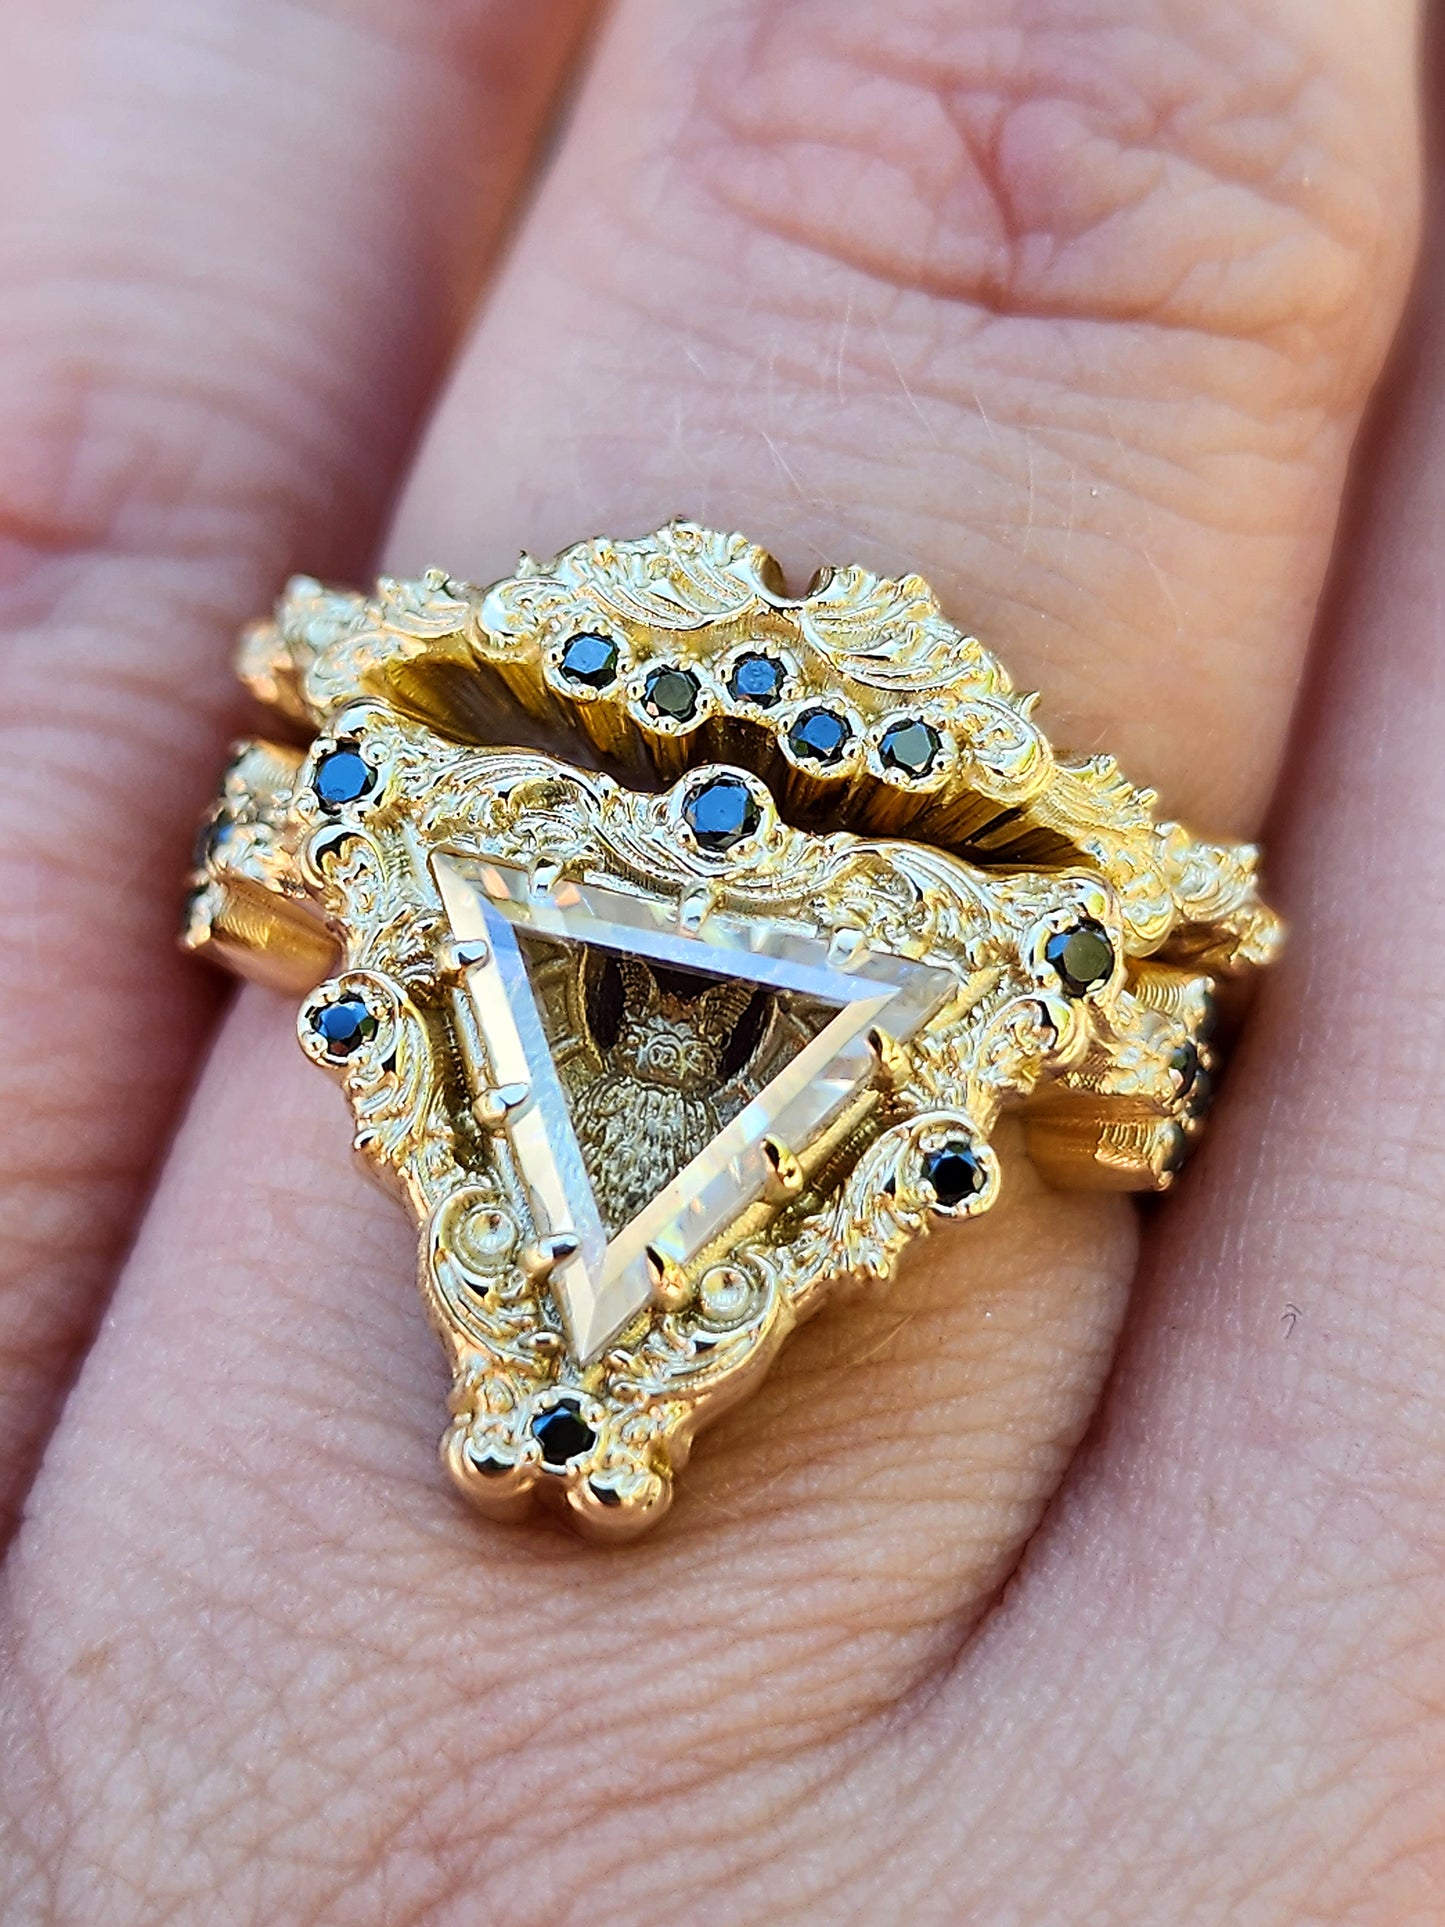 Victorian Gothic Bat Engagement Ring Shadow Box with Triangle Portrait Cut Moissanite Wedding Ring Set Baroque Scrolls with Black or White Diamonds 14k Gold Ethereal Unique Fine Jewelry